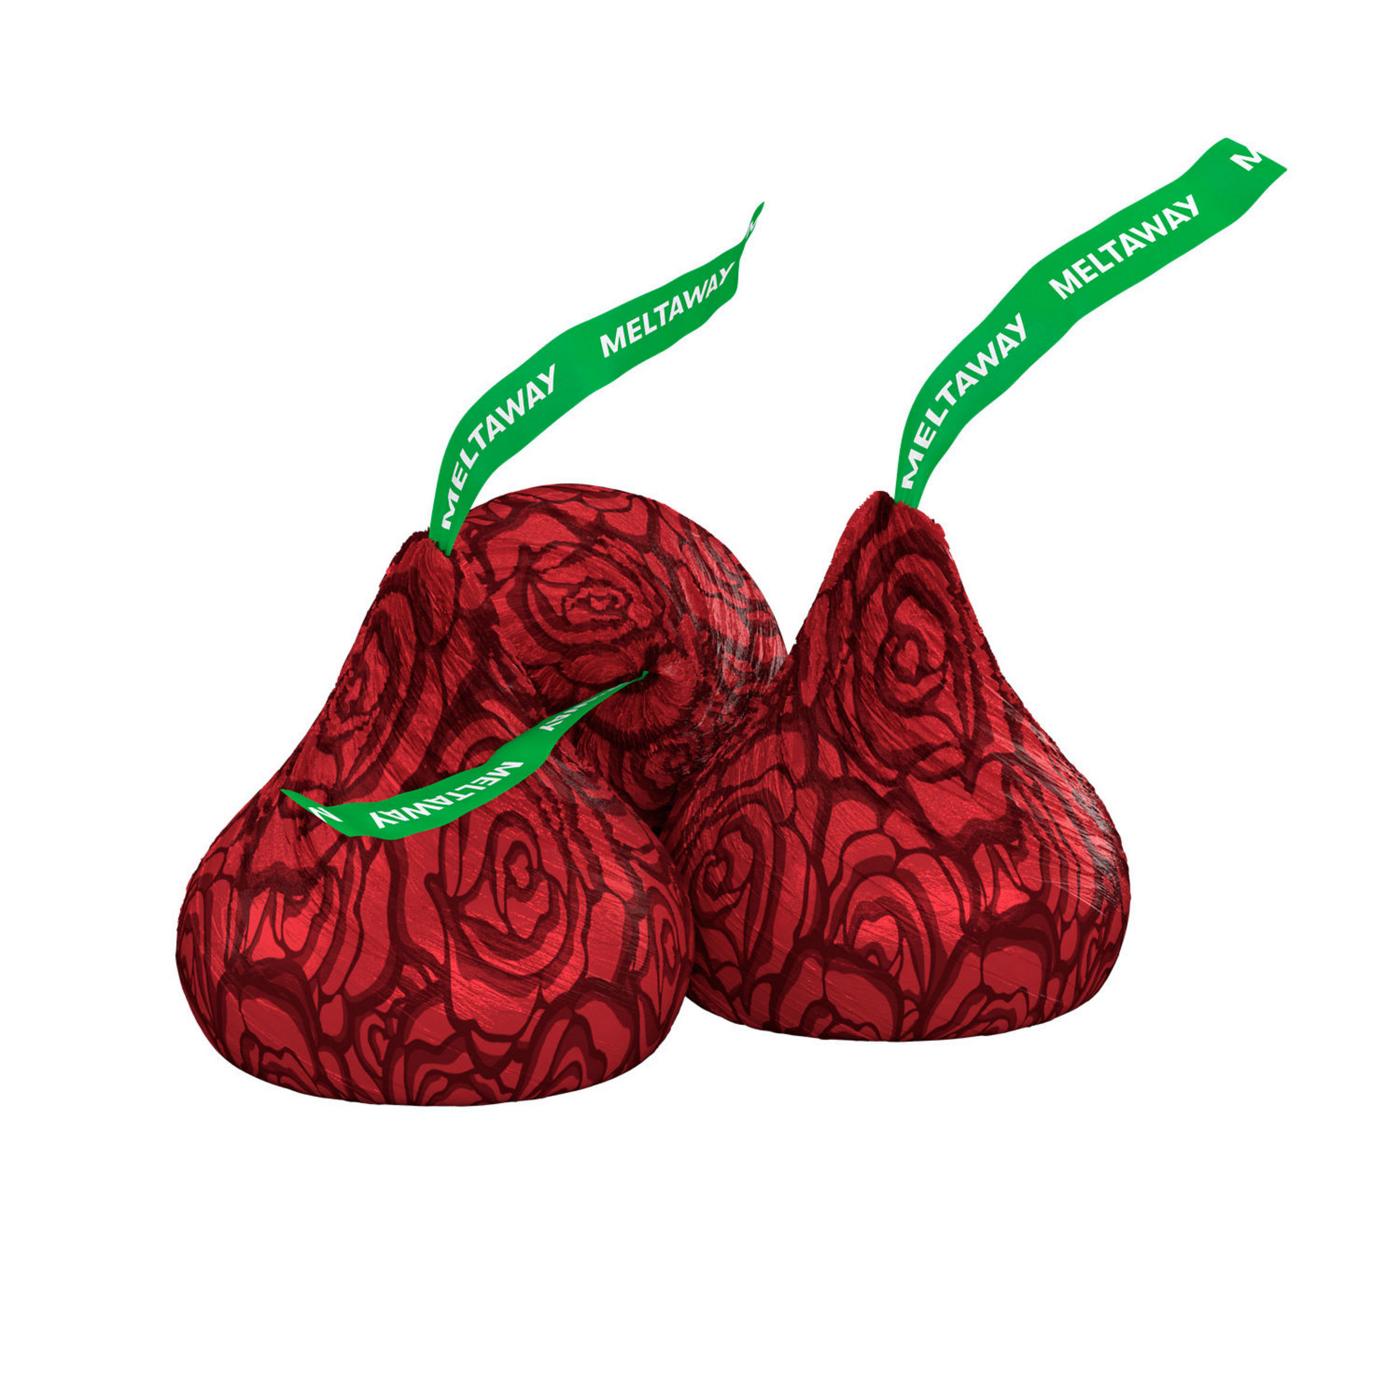 Hershey's Kisses Roses Milk Chocolate Meltaway Valentine's Candy; image 7 of 7